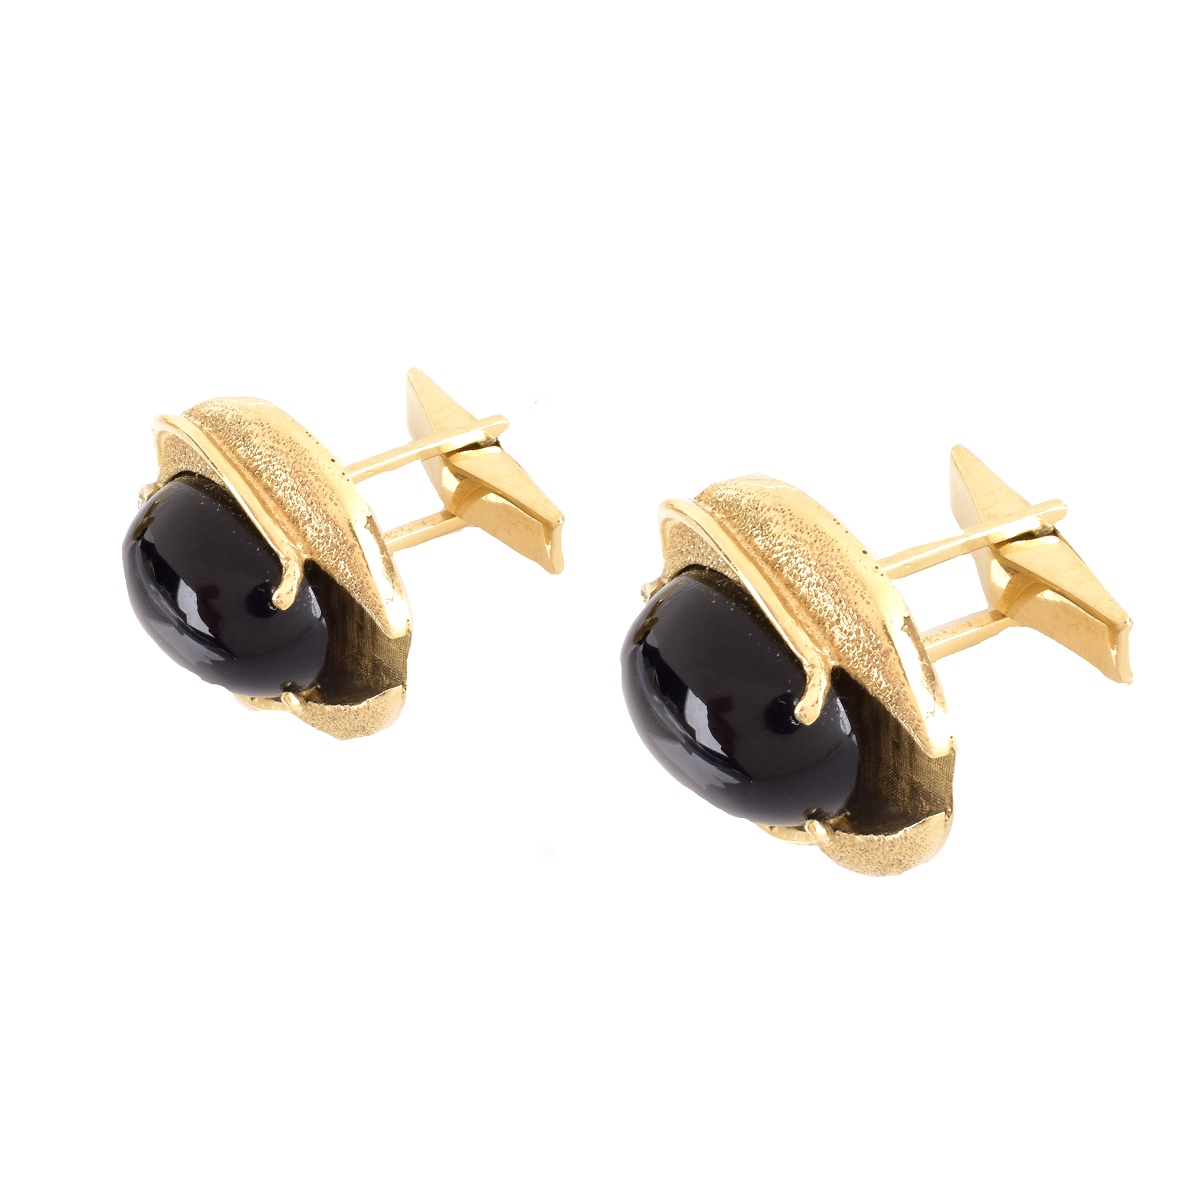 Vintage 14K Gold and Onyx Cufflinks